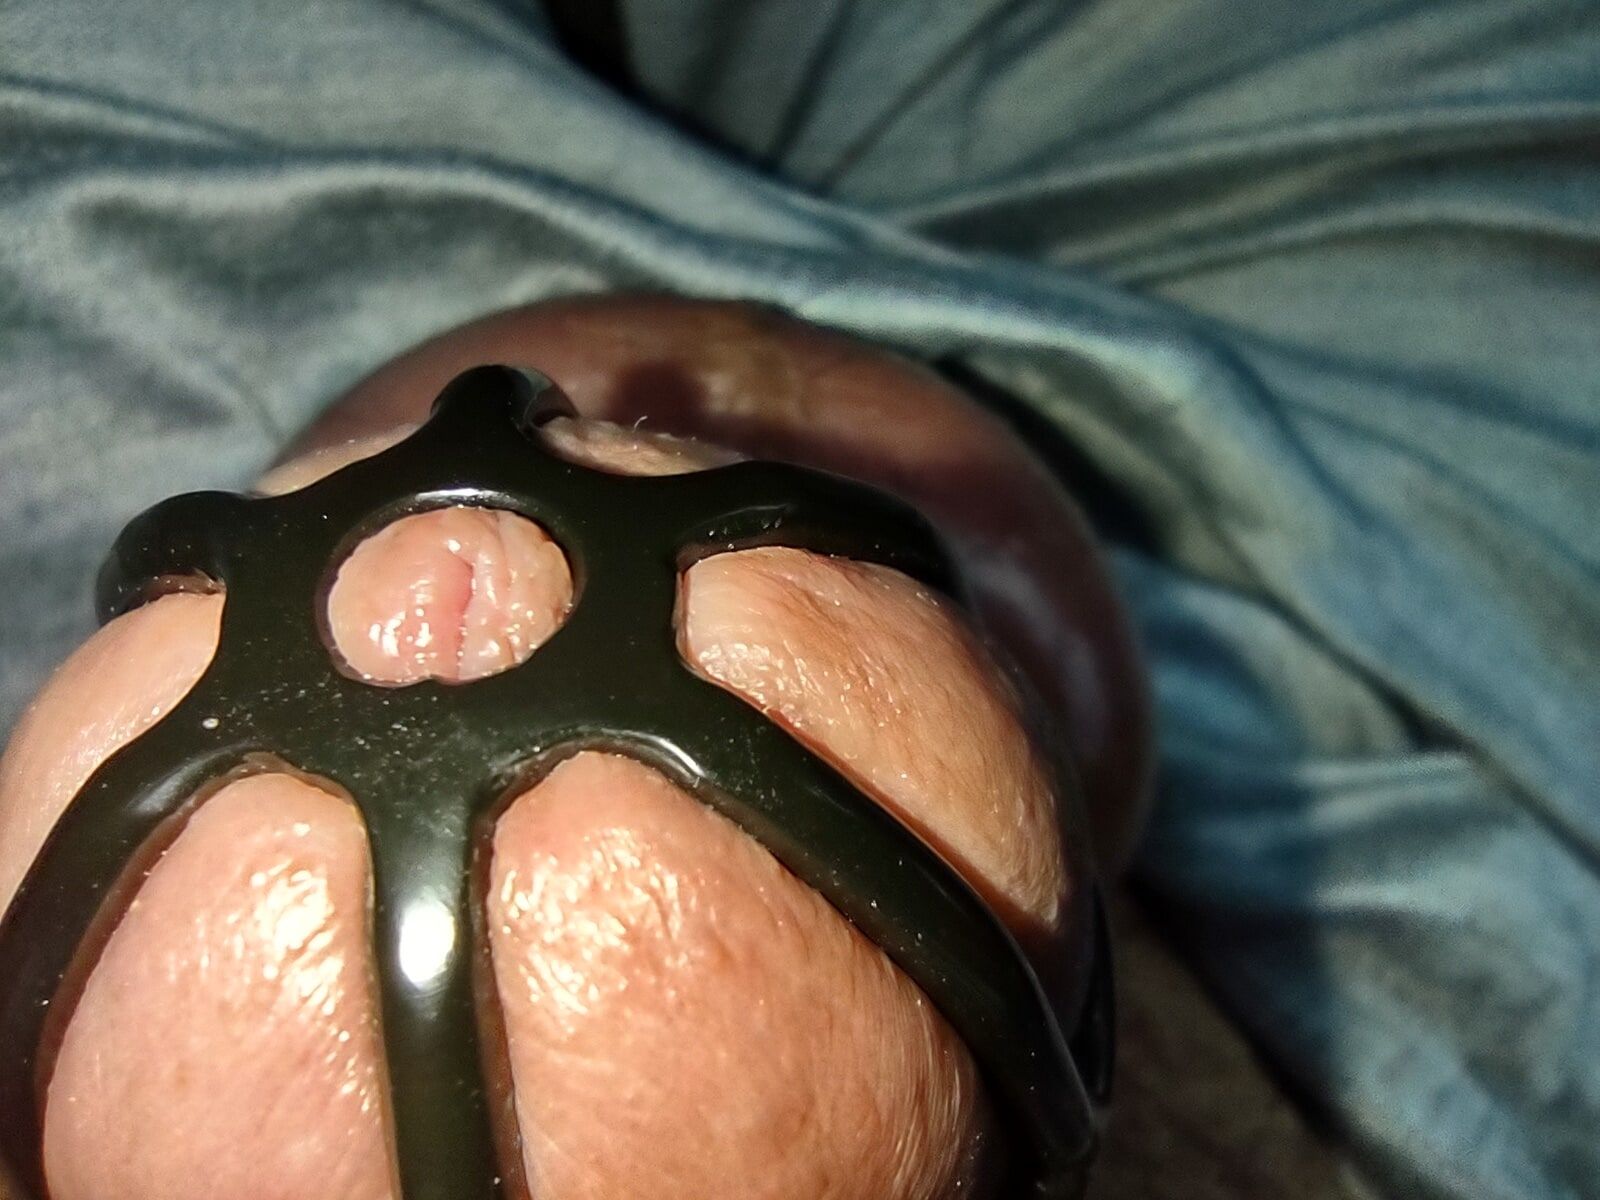 Tying up my cock caged dick and balls. Making my bulge huge #2